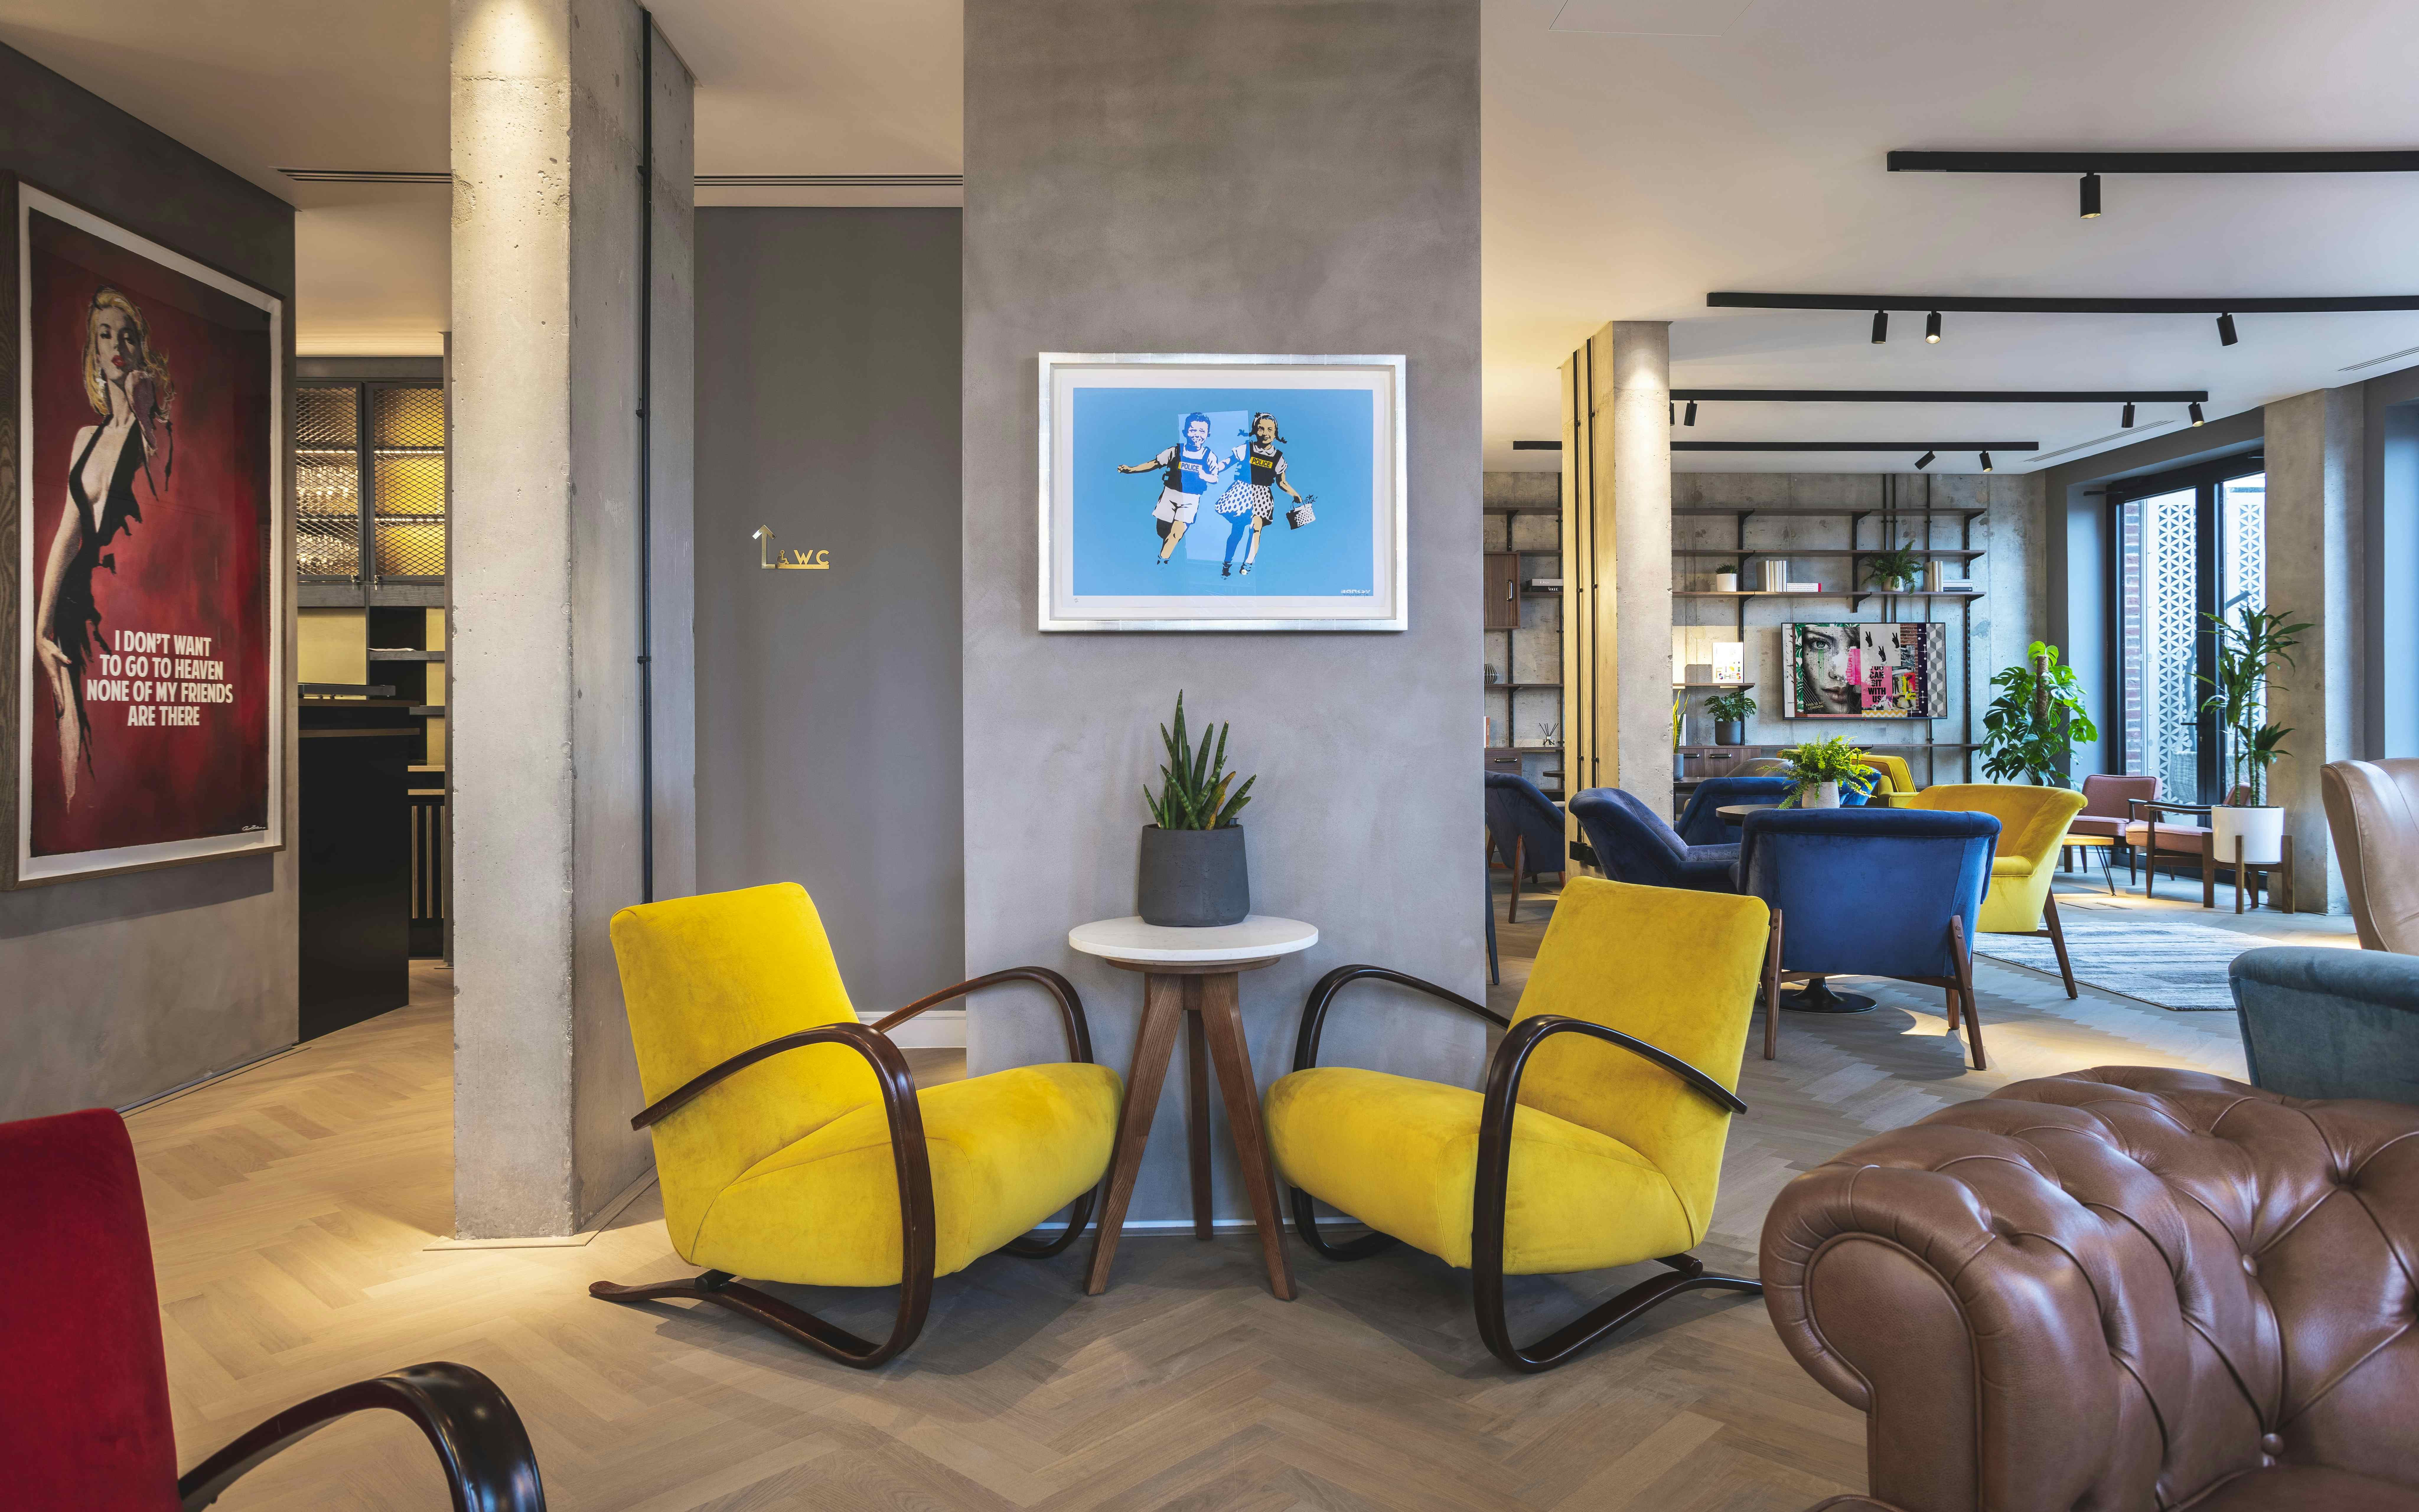 5th Floor Lounge, The Gate Hotel - Aldgate East, London